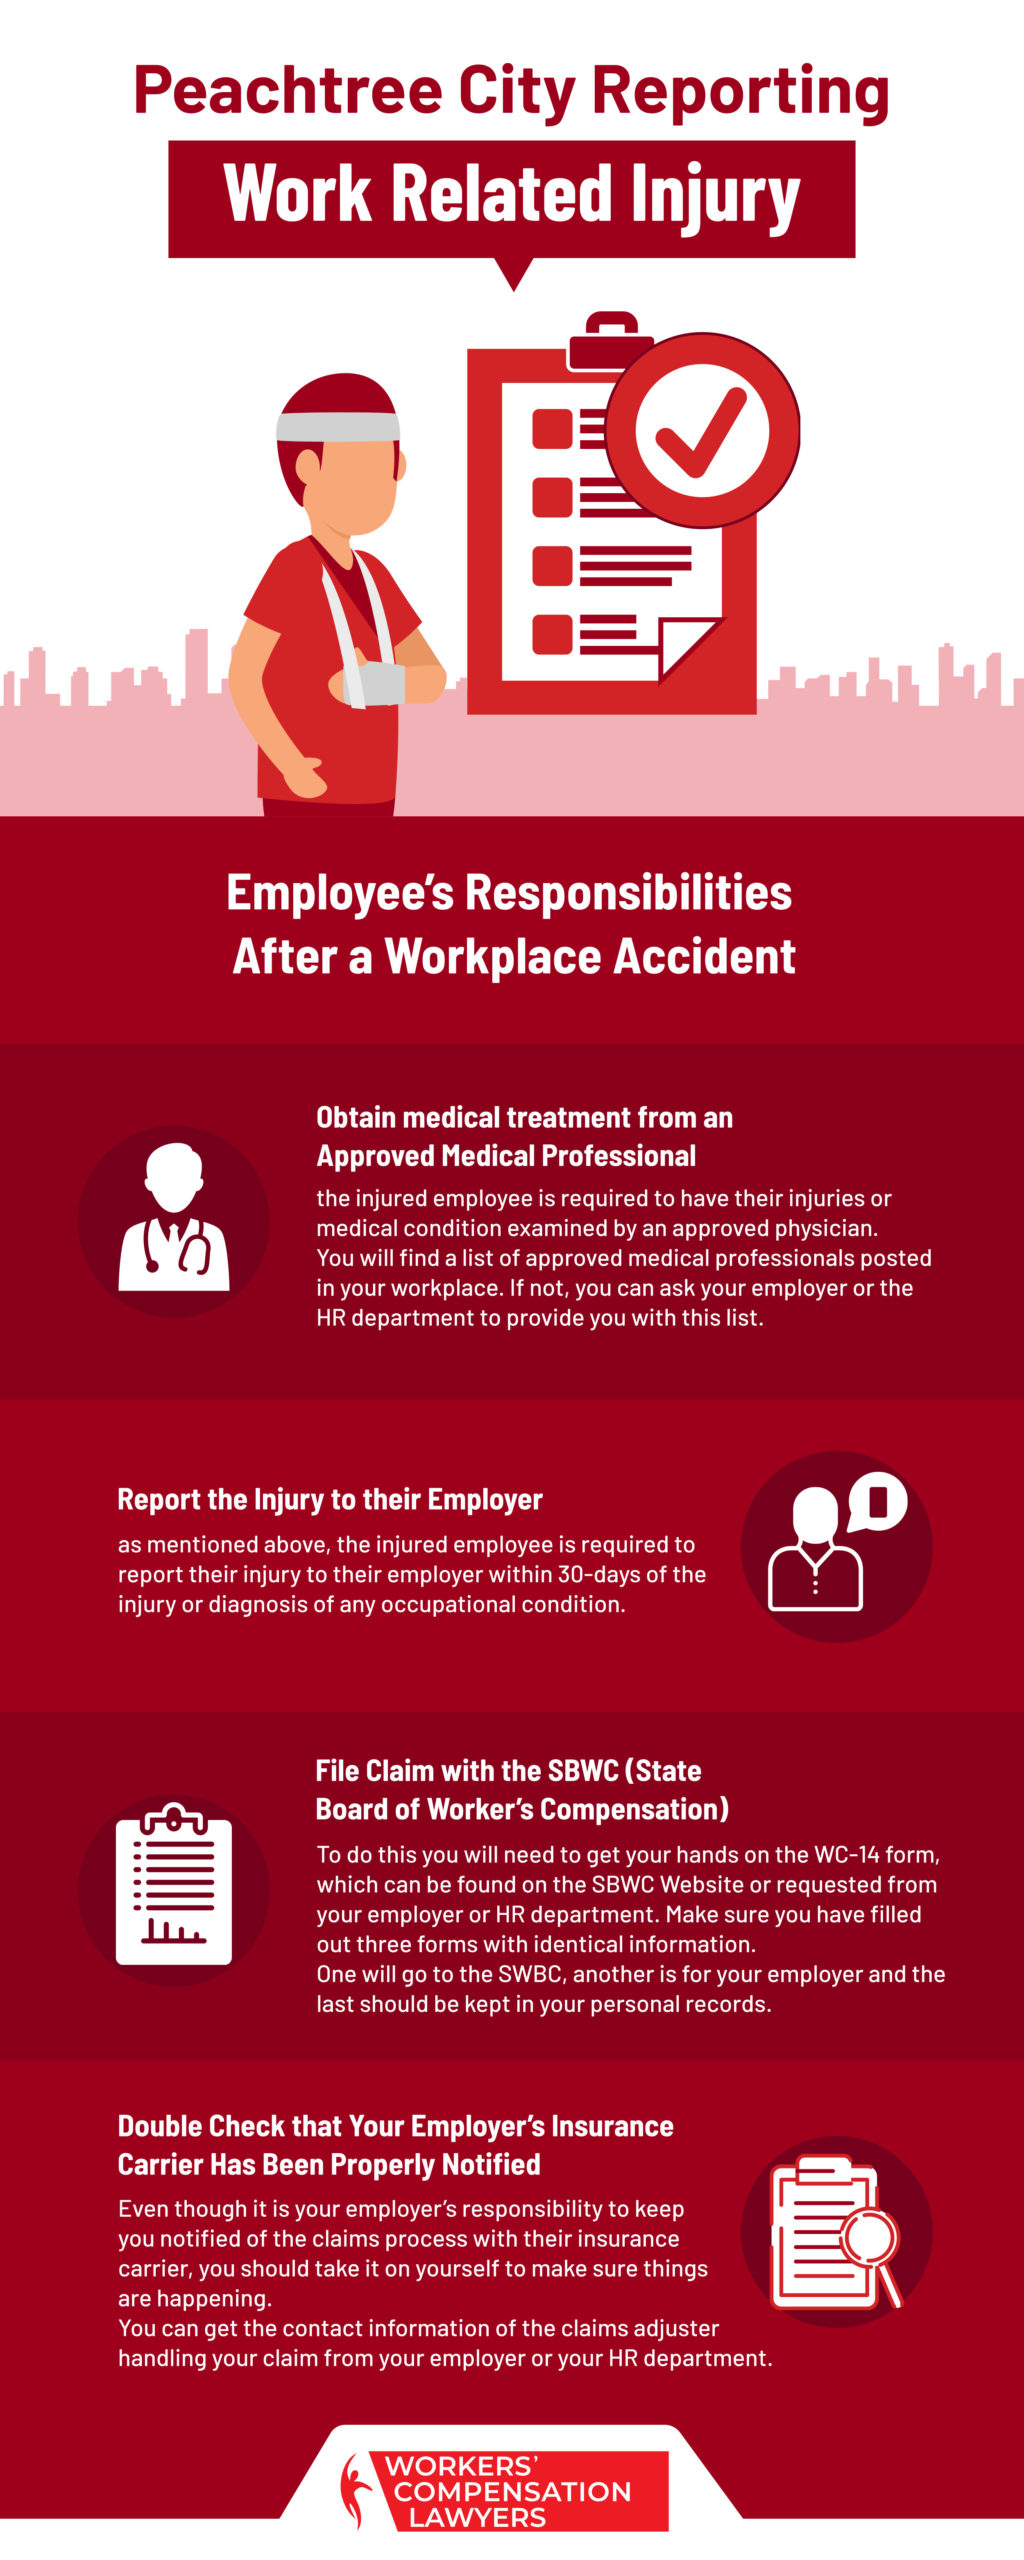 Peachtree City Reporting Work Injury Infographic